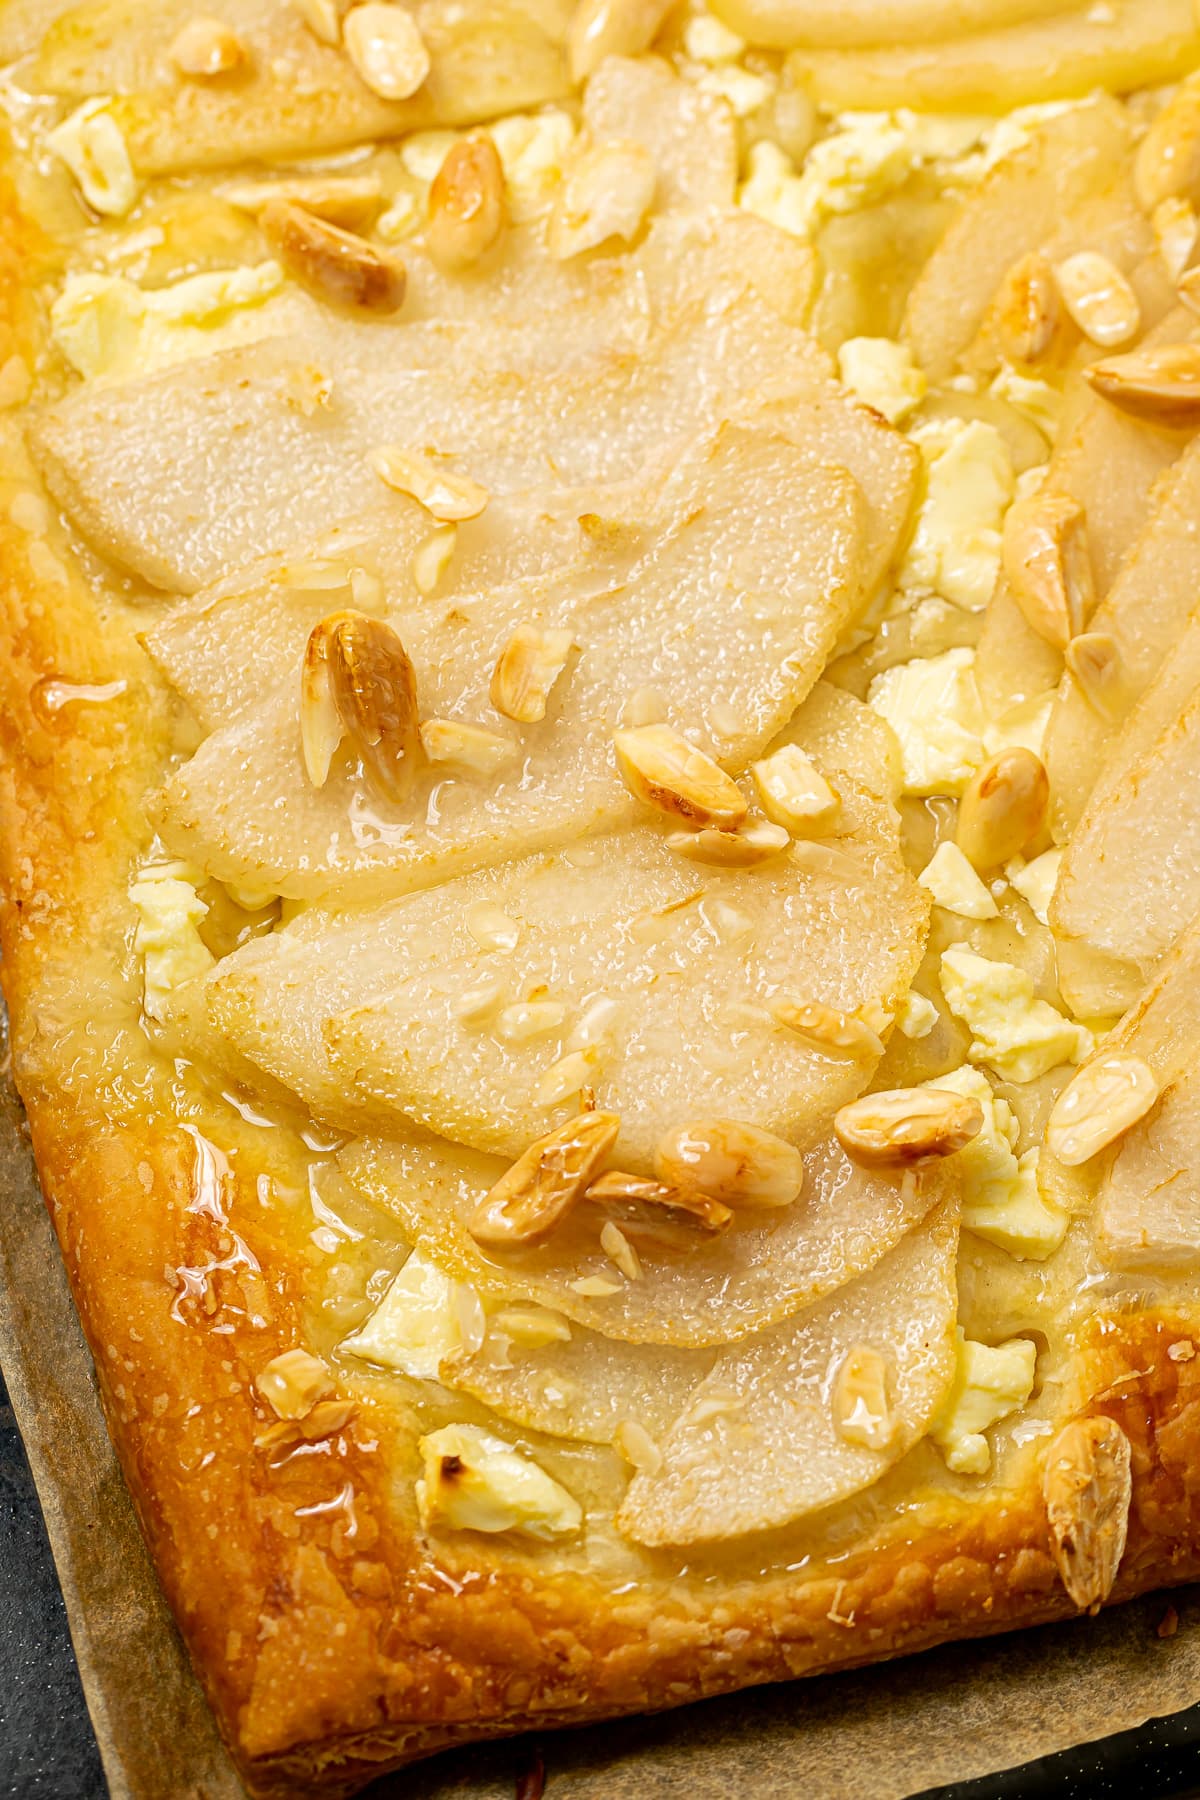 Close-up of the pear and feta tart with almonds and honey glaze, highlighting the juicy pear slices.